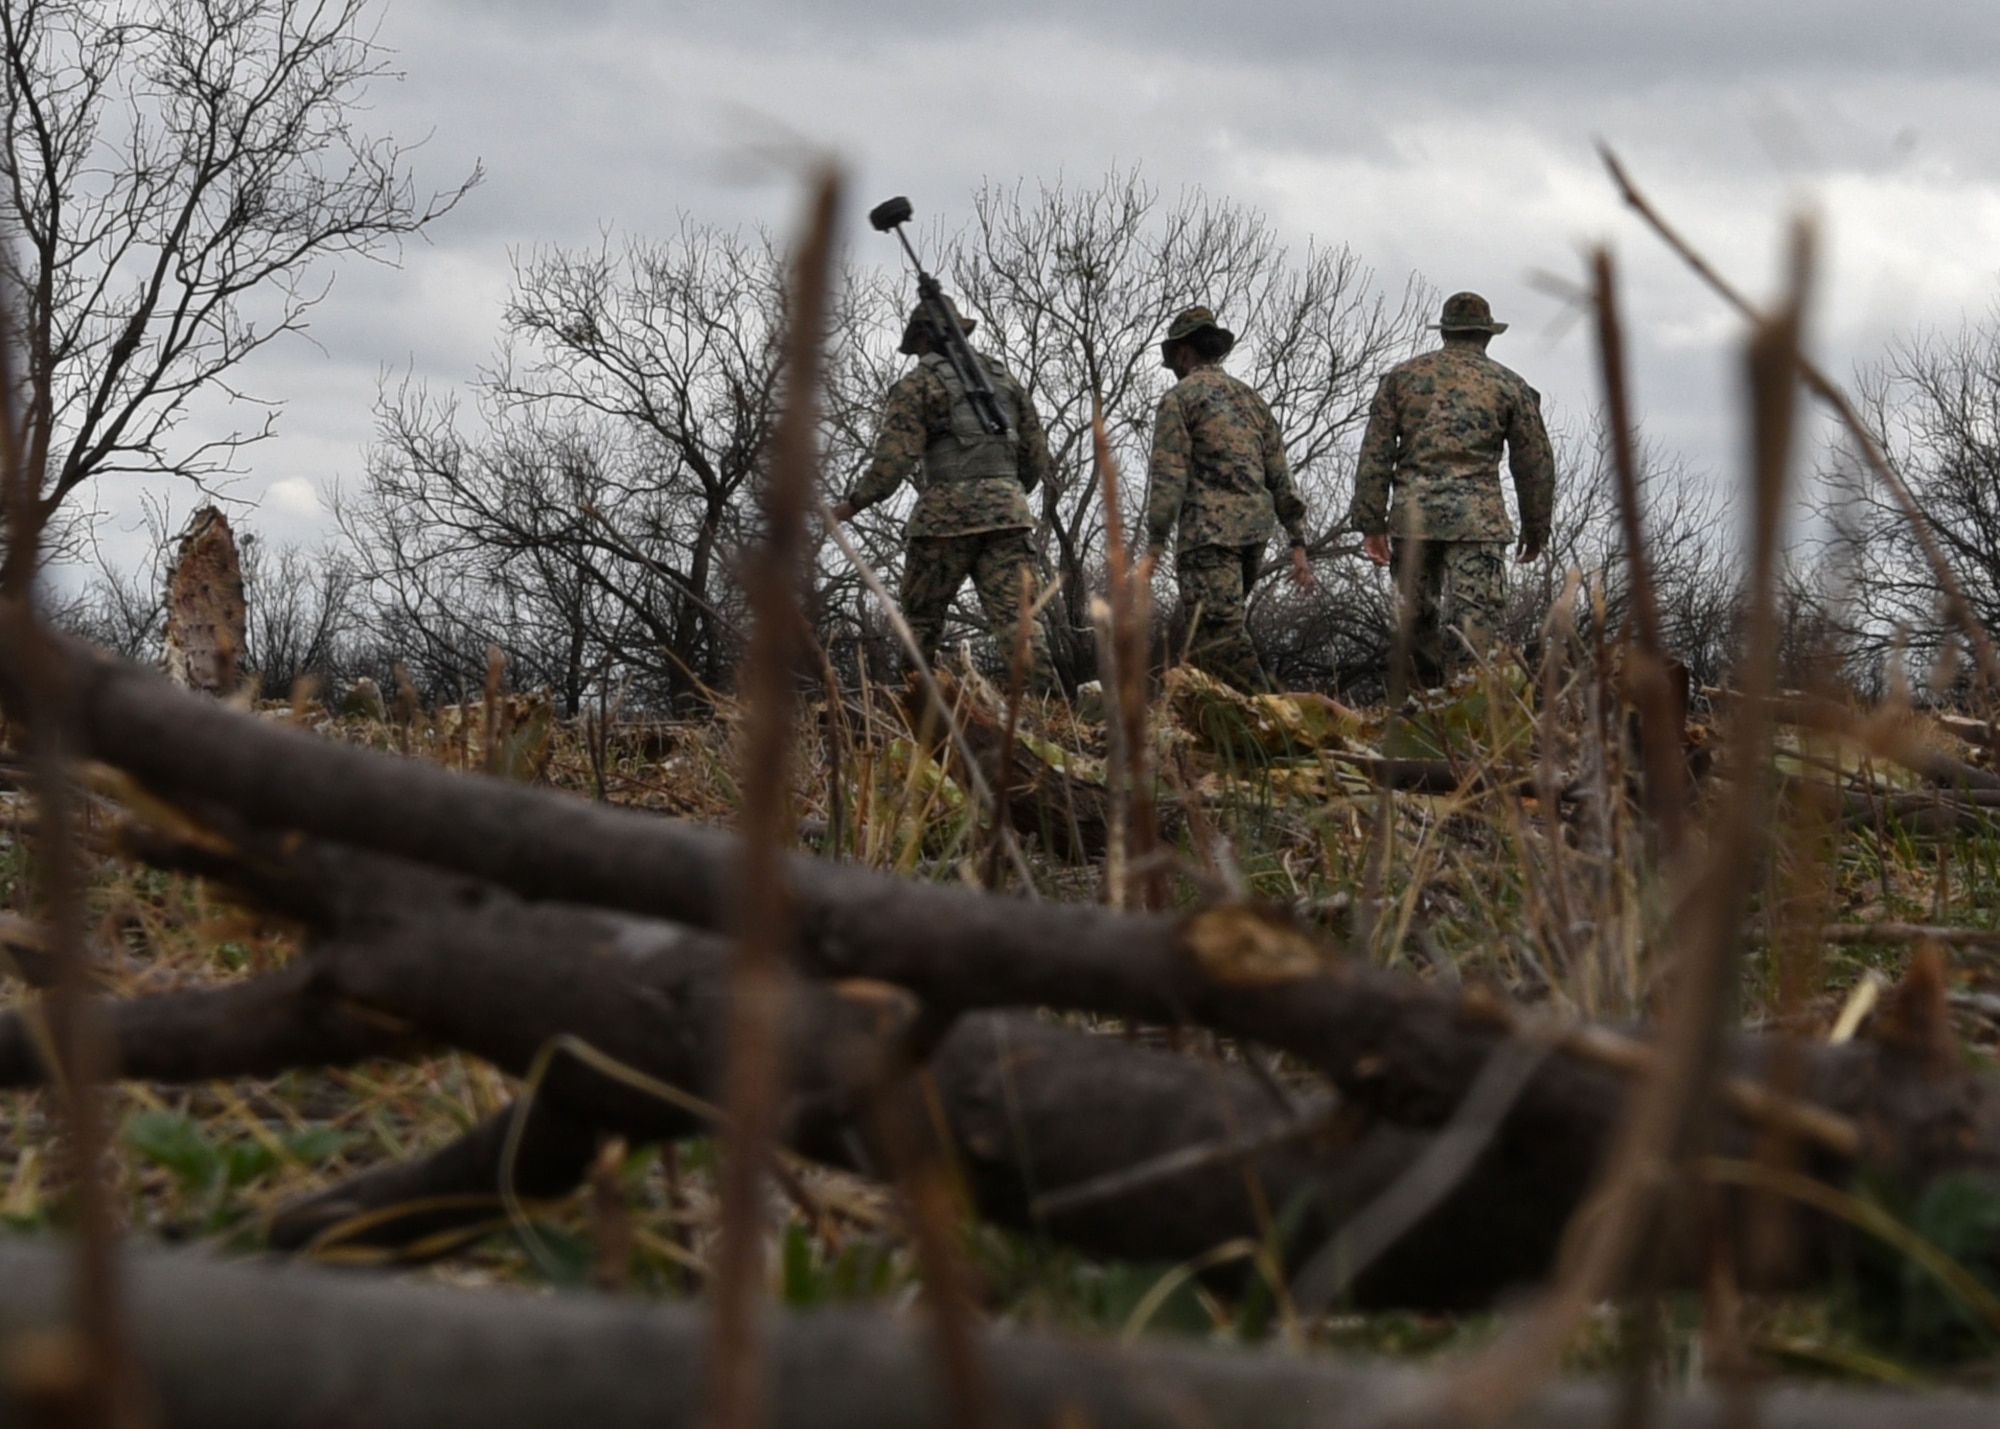 U.S. Marine Corps Tactical Signals Intelligence Operator course students from the Marine Corps Detachment, snake through brush and debris during an intelligence field exercise outside of the MCD dormitories on Goodfellow Air Force Base, Texas, March 22, 2021. The students operated in small teams, which were designed to optimize the training curriculum and simulated real-life scenarios. (U.S. Air Force photo by Senior Airman Abbey Rieves)